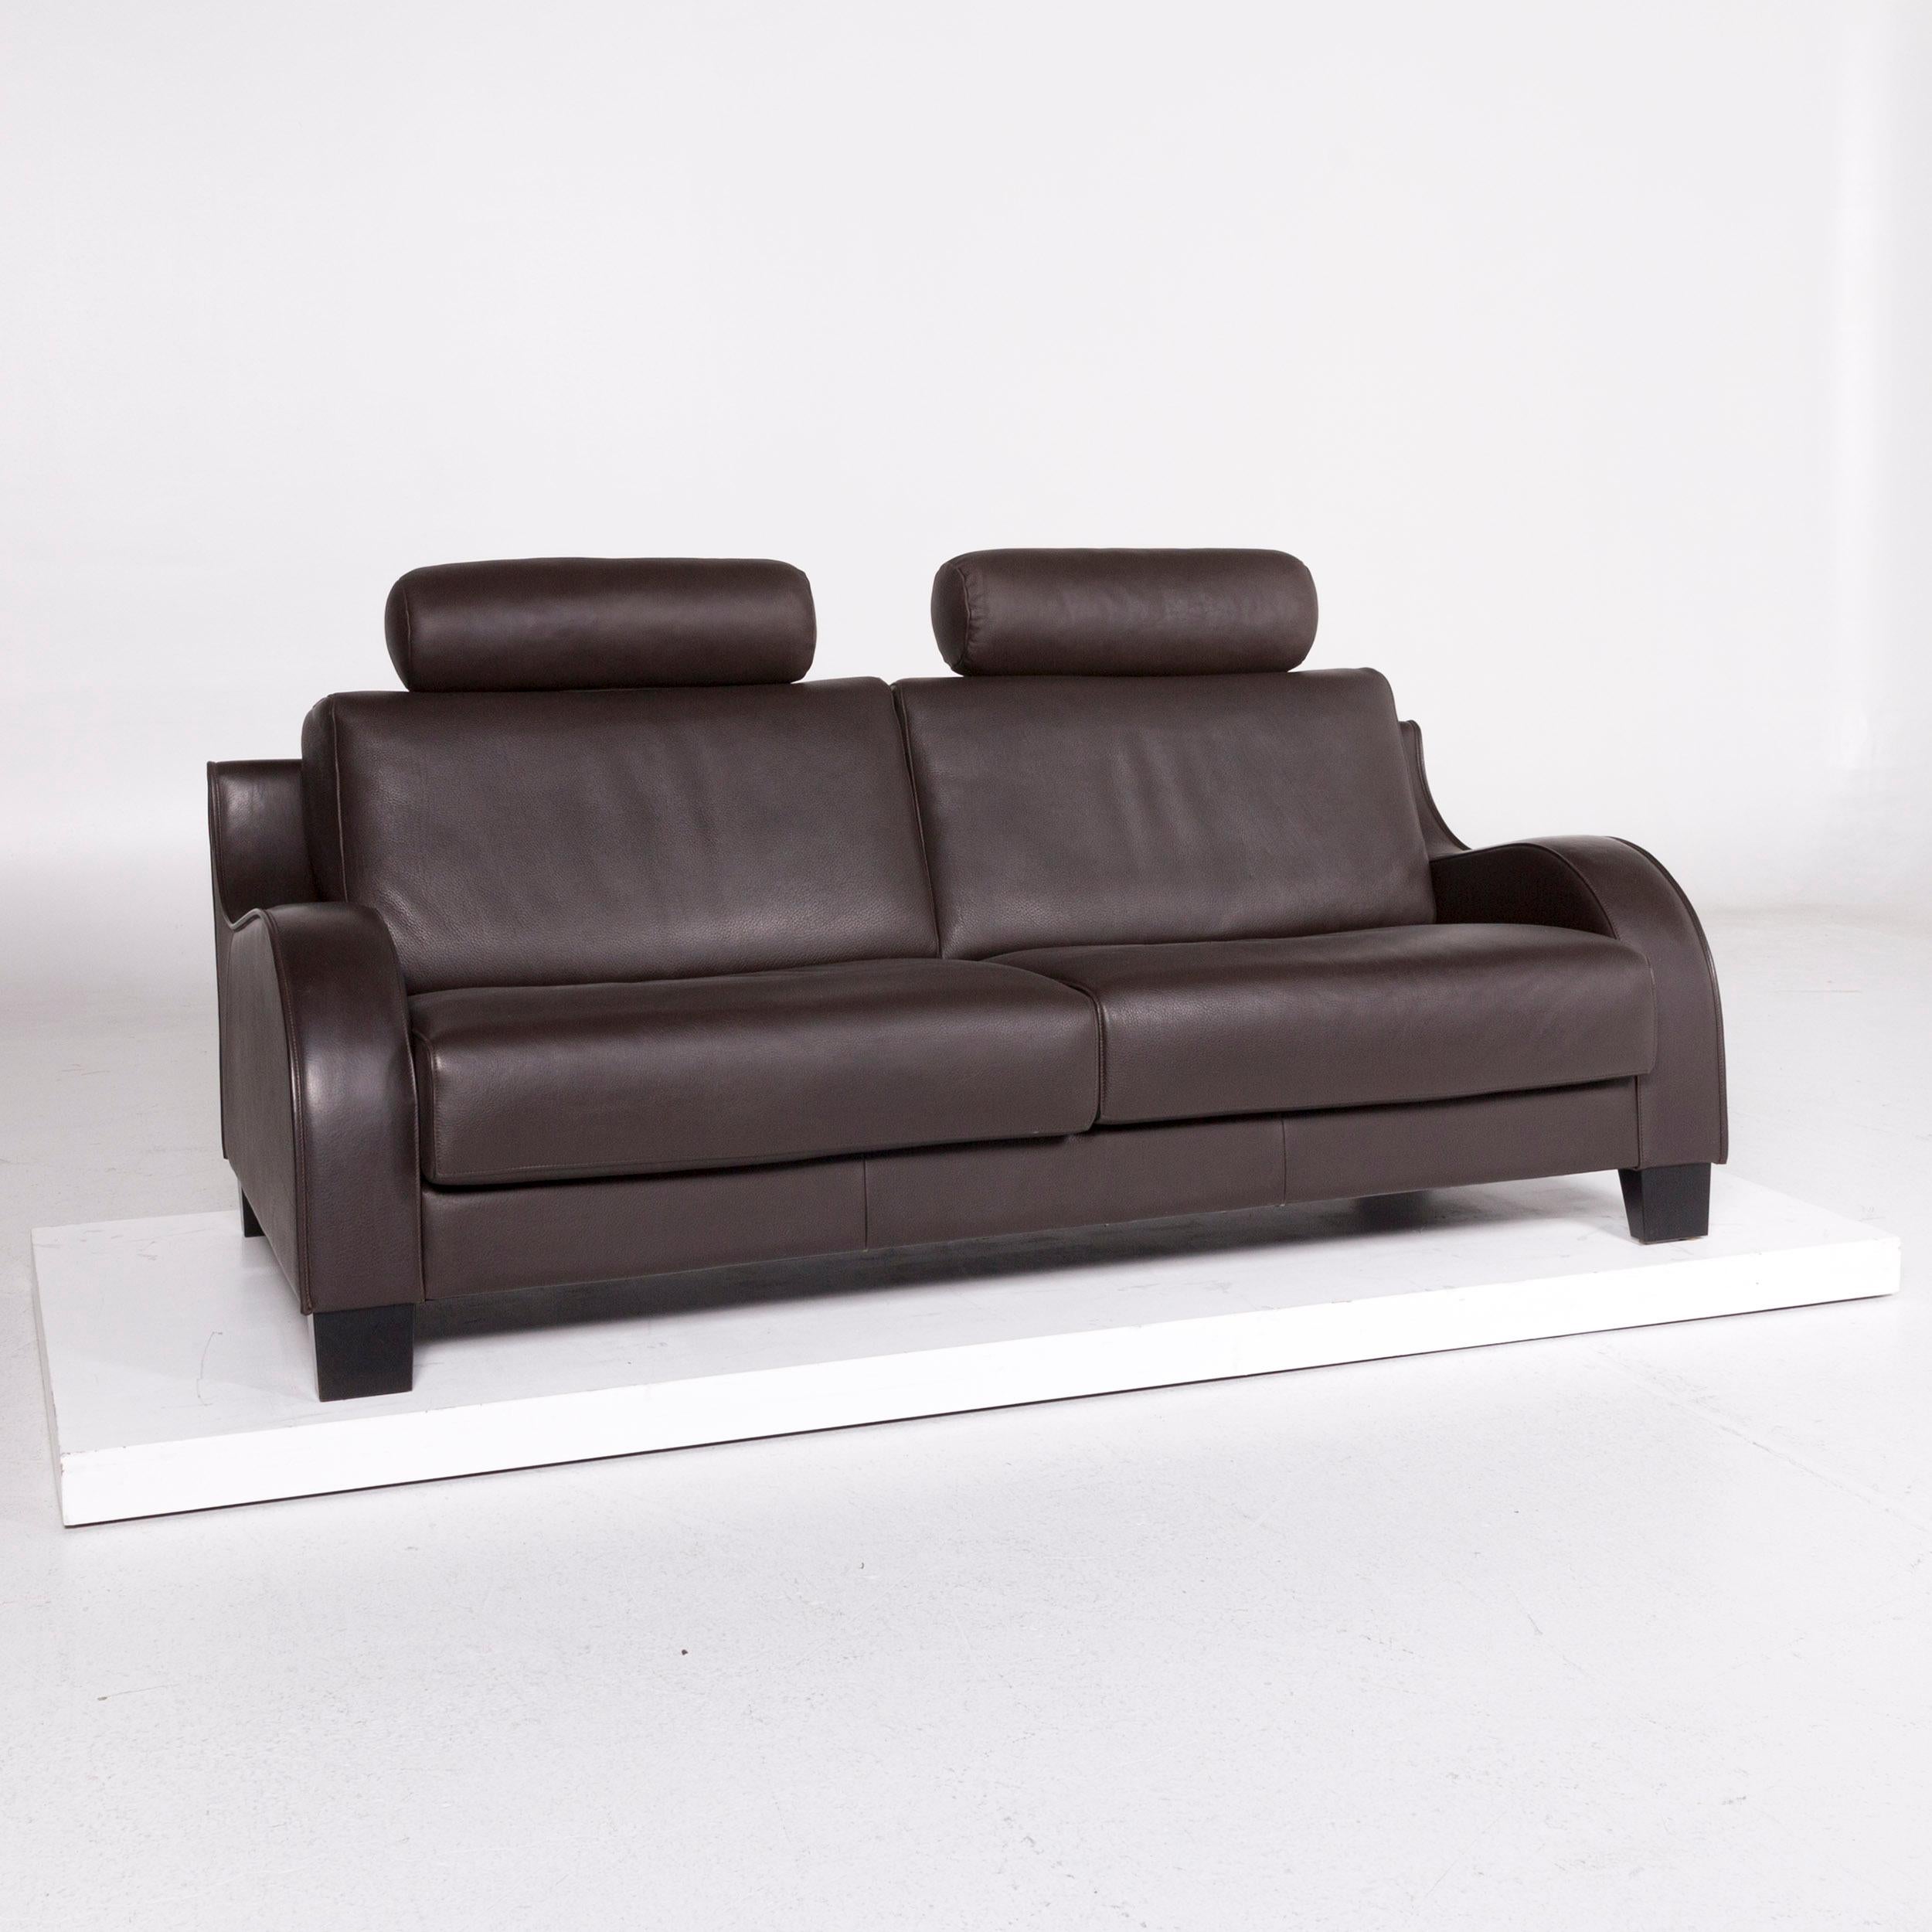 We bring to you a De Sede DS 122 leather sofa brown dark brown two-seat couch.
  
 Product measurements in centimeters:
 
Depth 91
Width 200
Height 80
Seat-height 44
Rest-height 55
Seat-depth 54
Seat-width 170
Back-height 37.
      